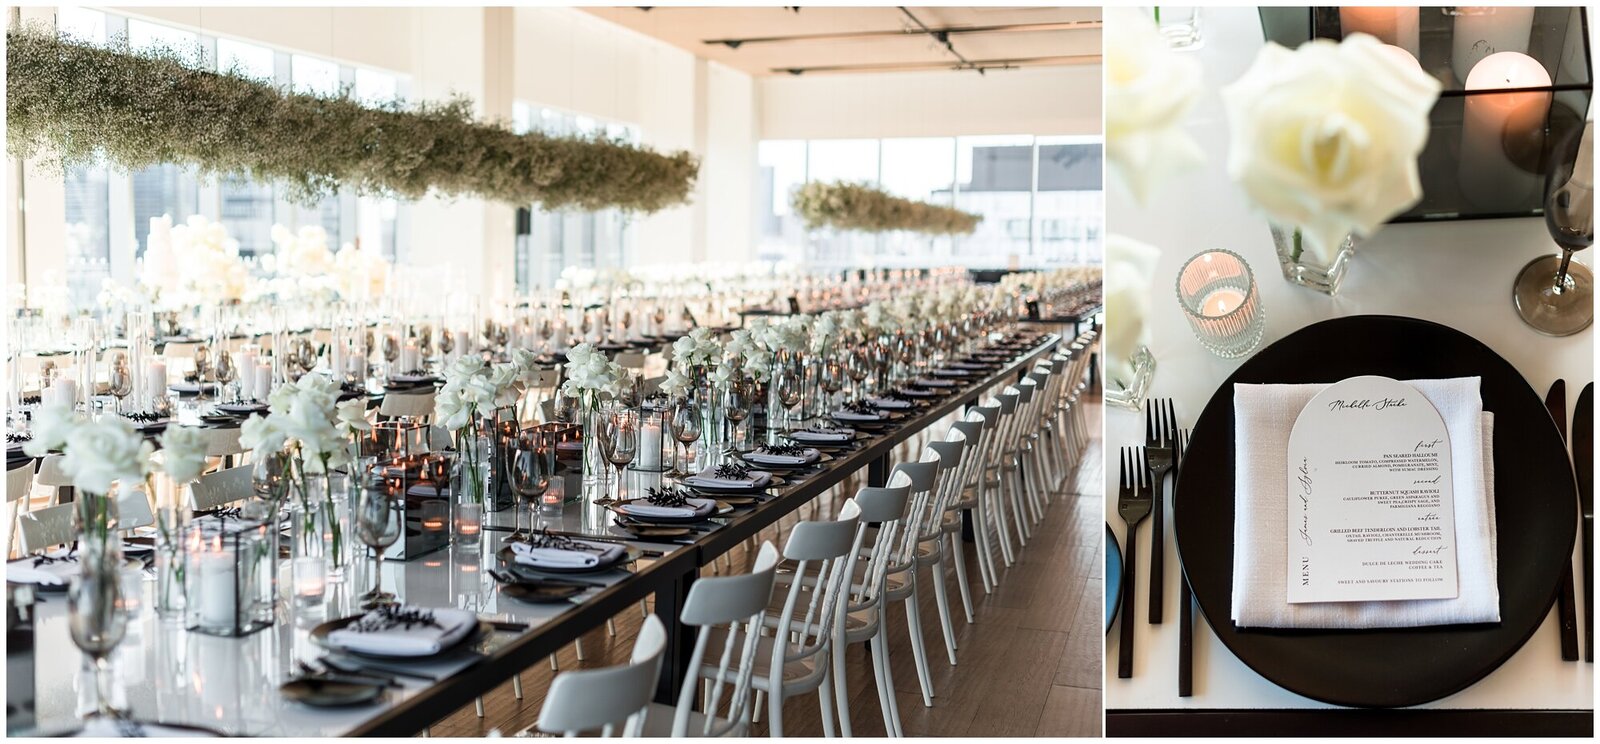 A wedding at The Globe and Mail Centre with Toronto skyline and tablescape